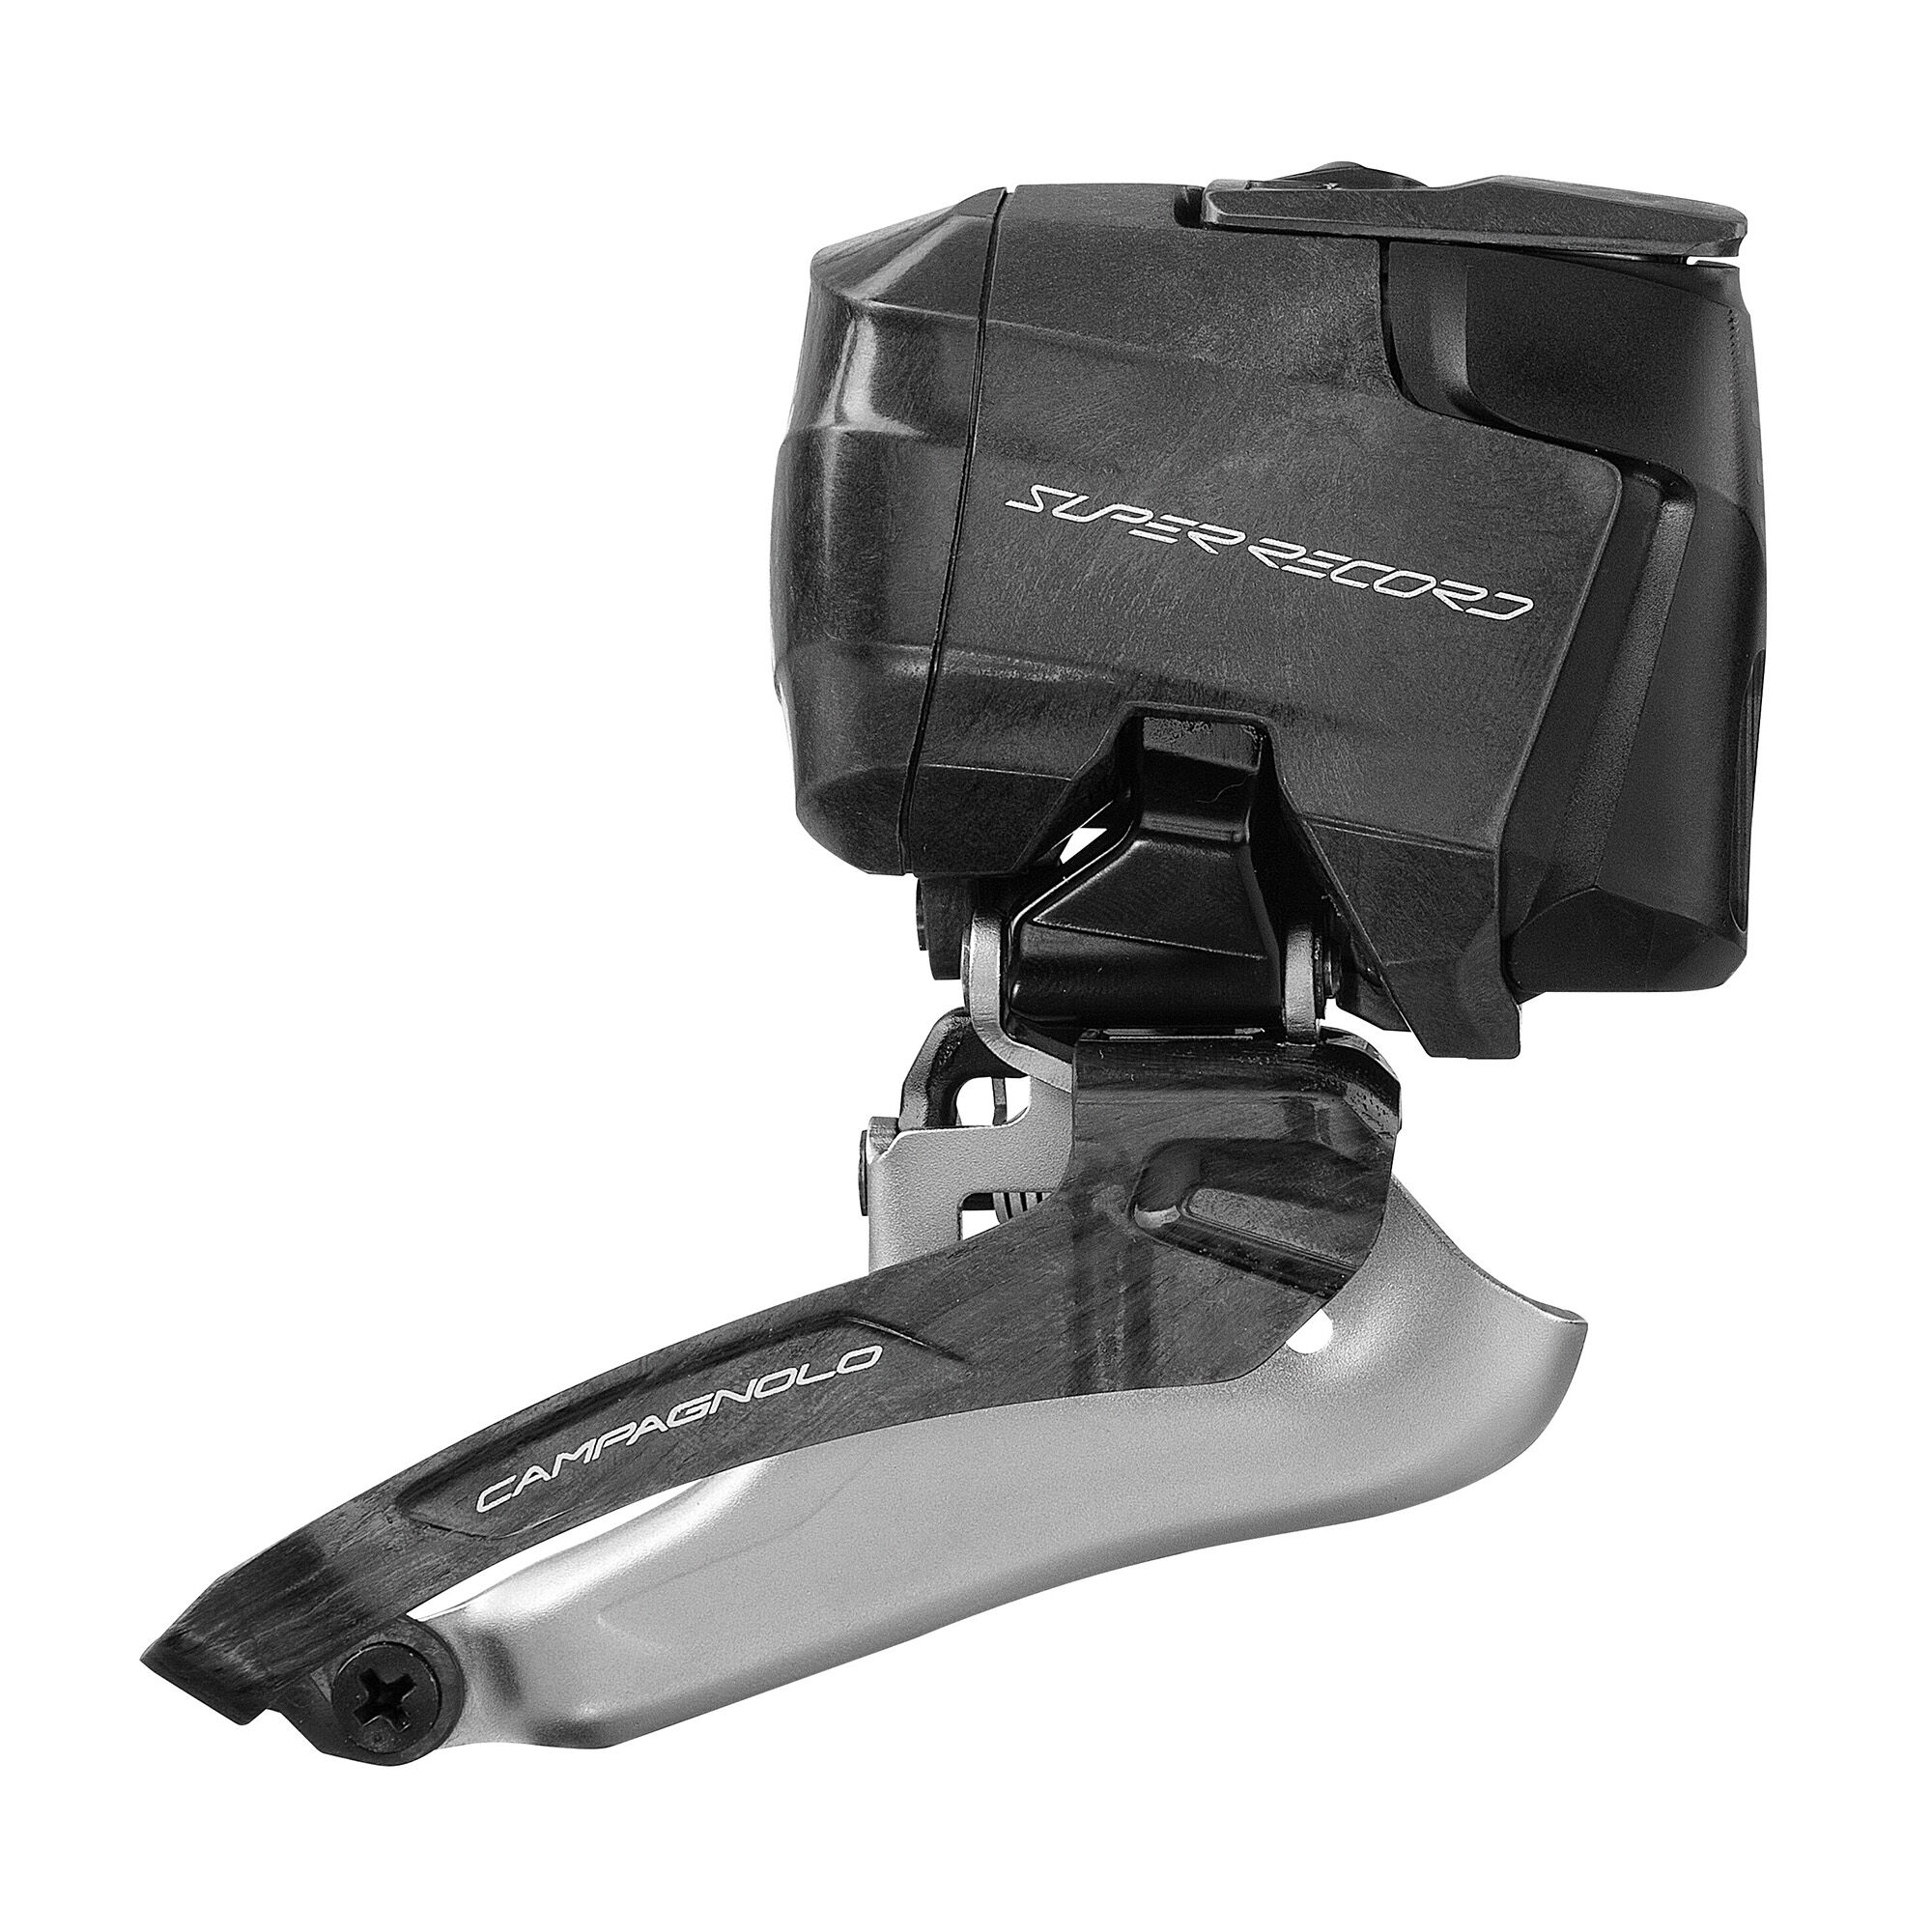 Super Record wireless groupset | Campagnolo